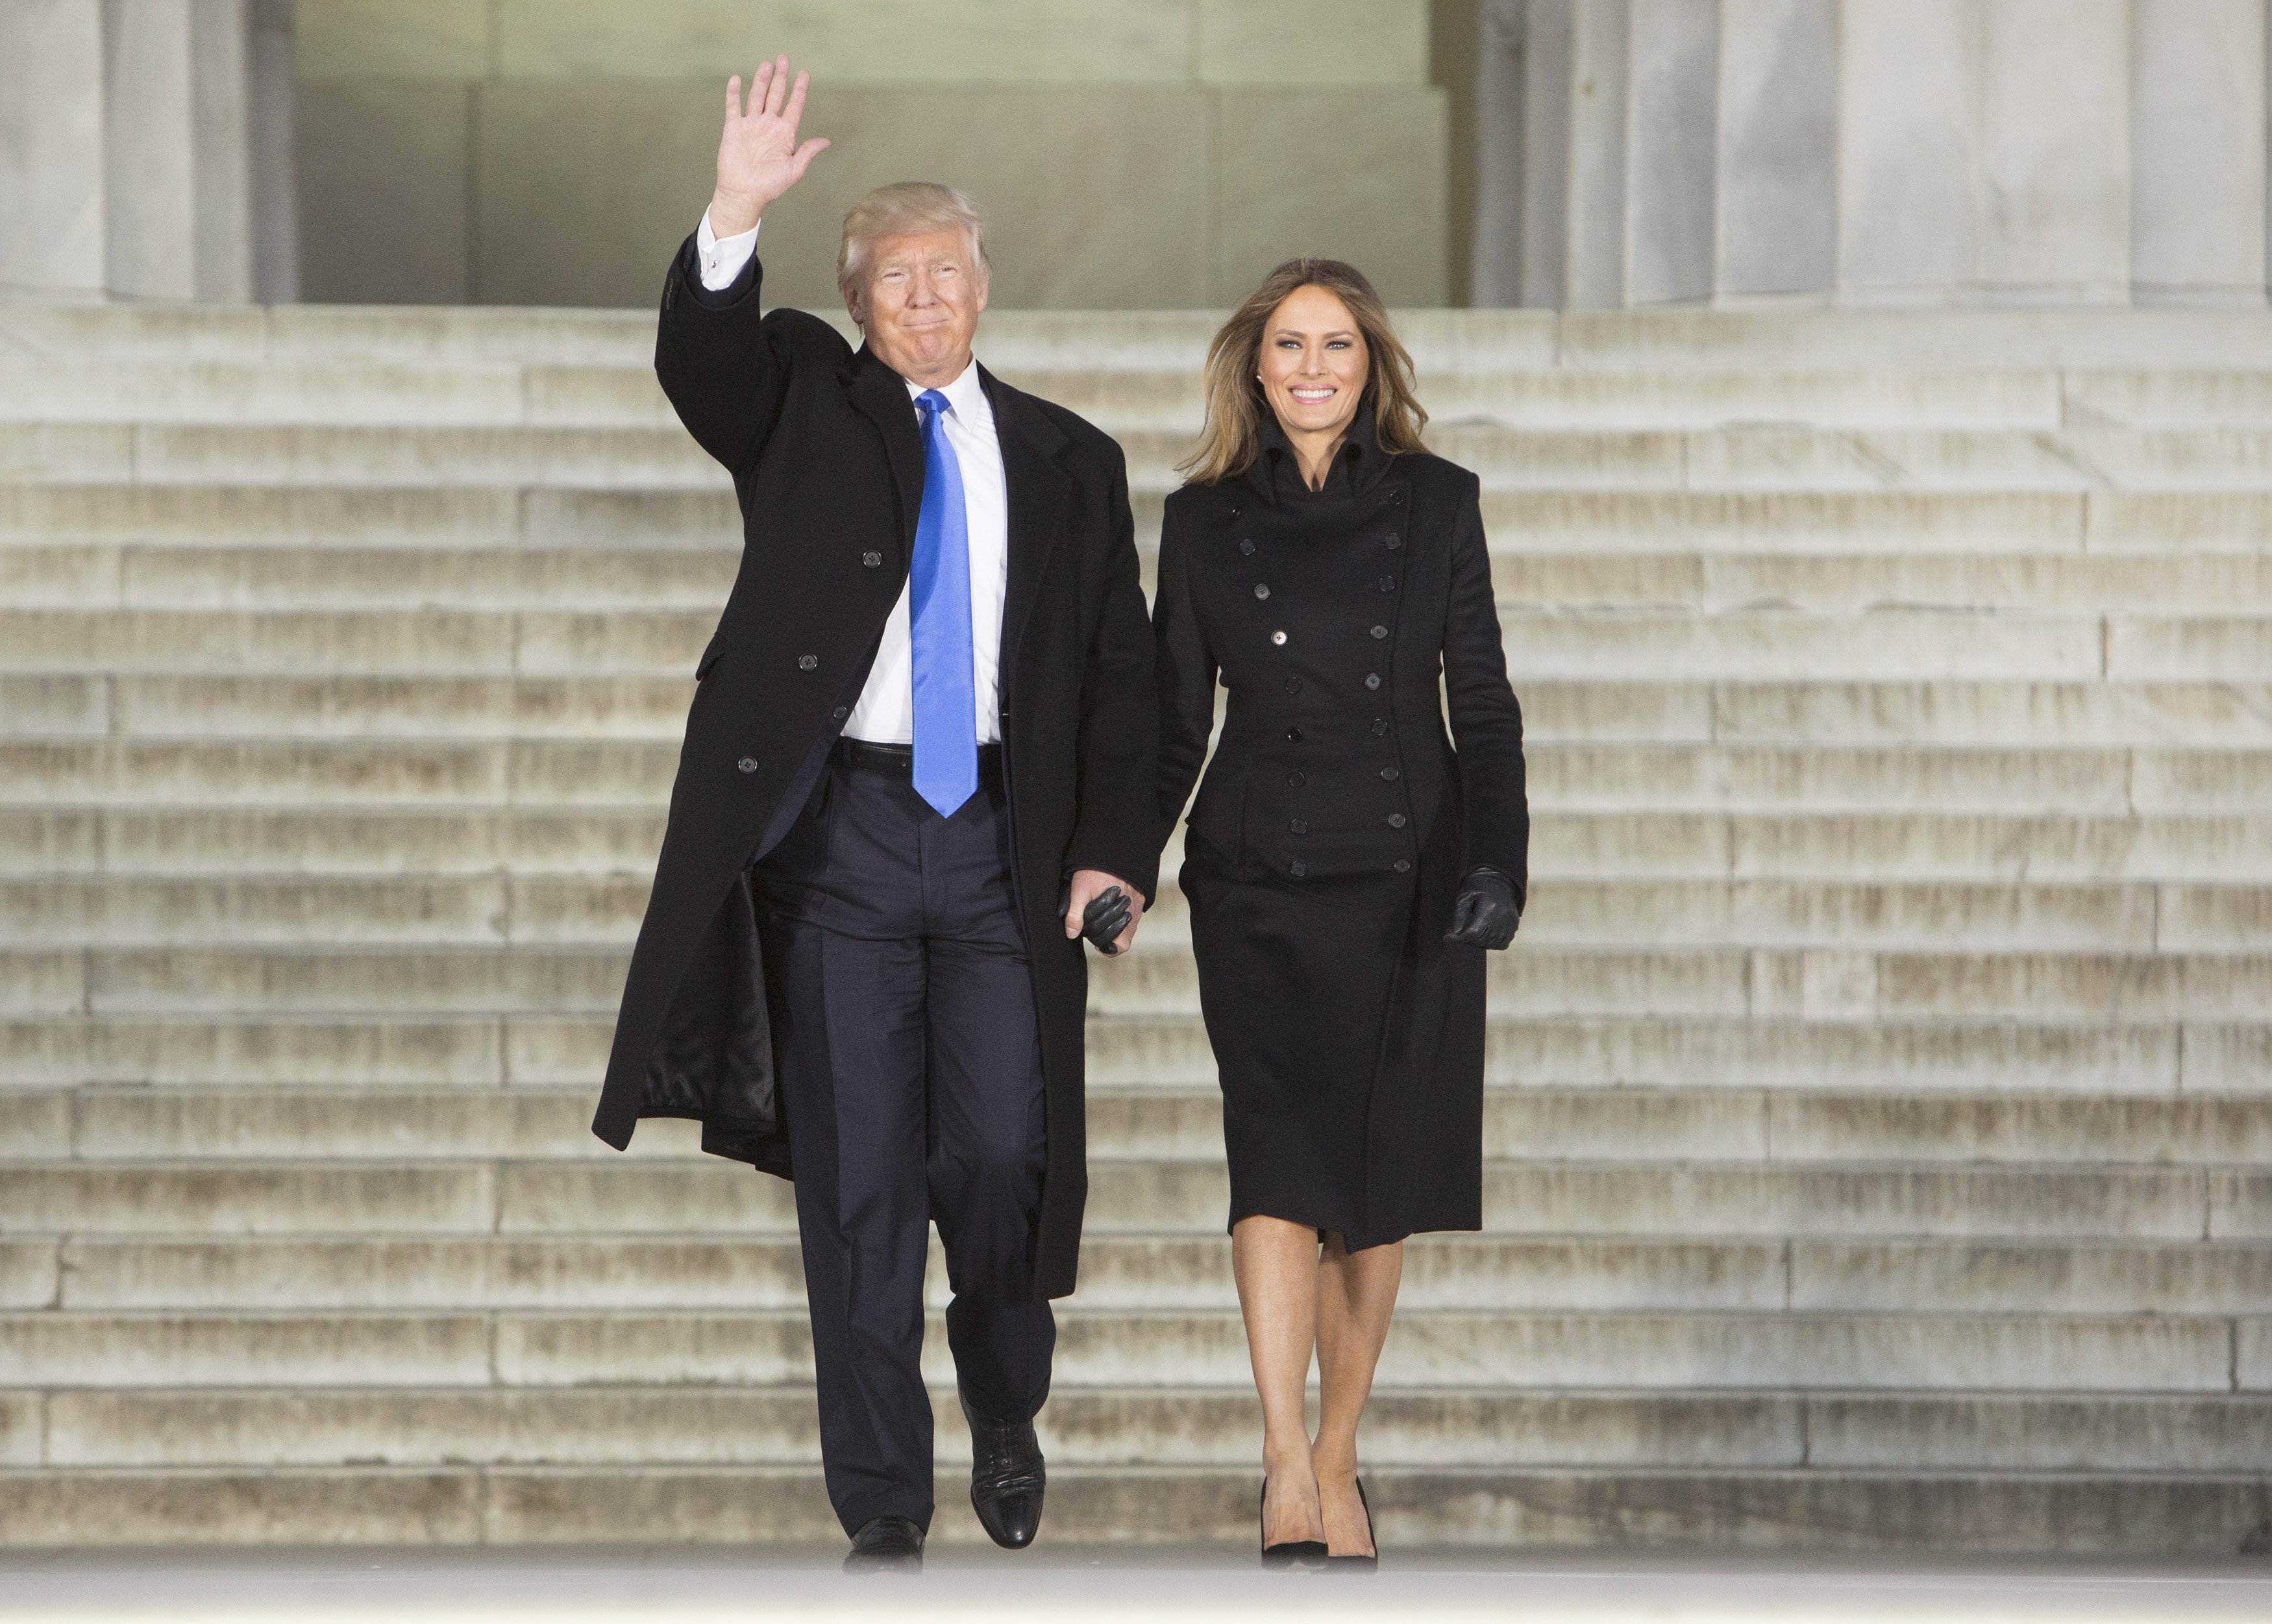 President-elect Trump and Melania Trump arrive to the "Make America Great Again Welcome Concert" at the Lincoln Memorial in Washington, on Jan. 19, 2017. (Chris Kleponis—Getty Images)